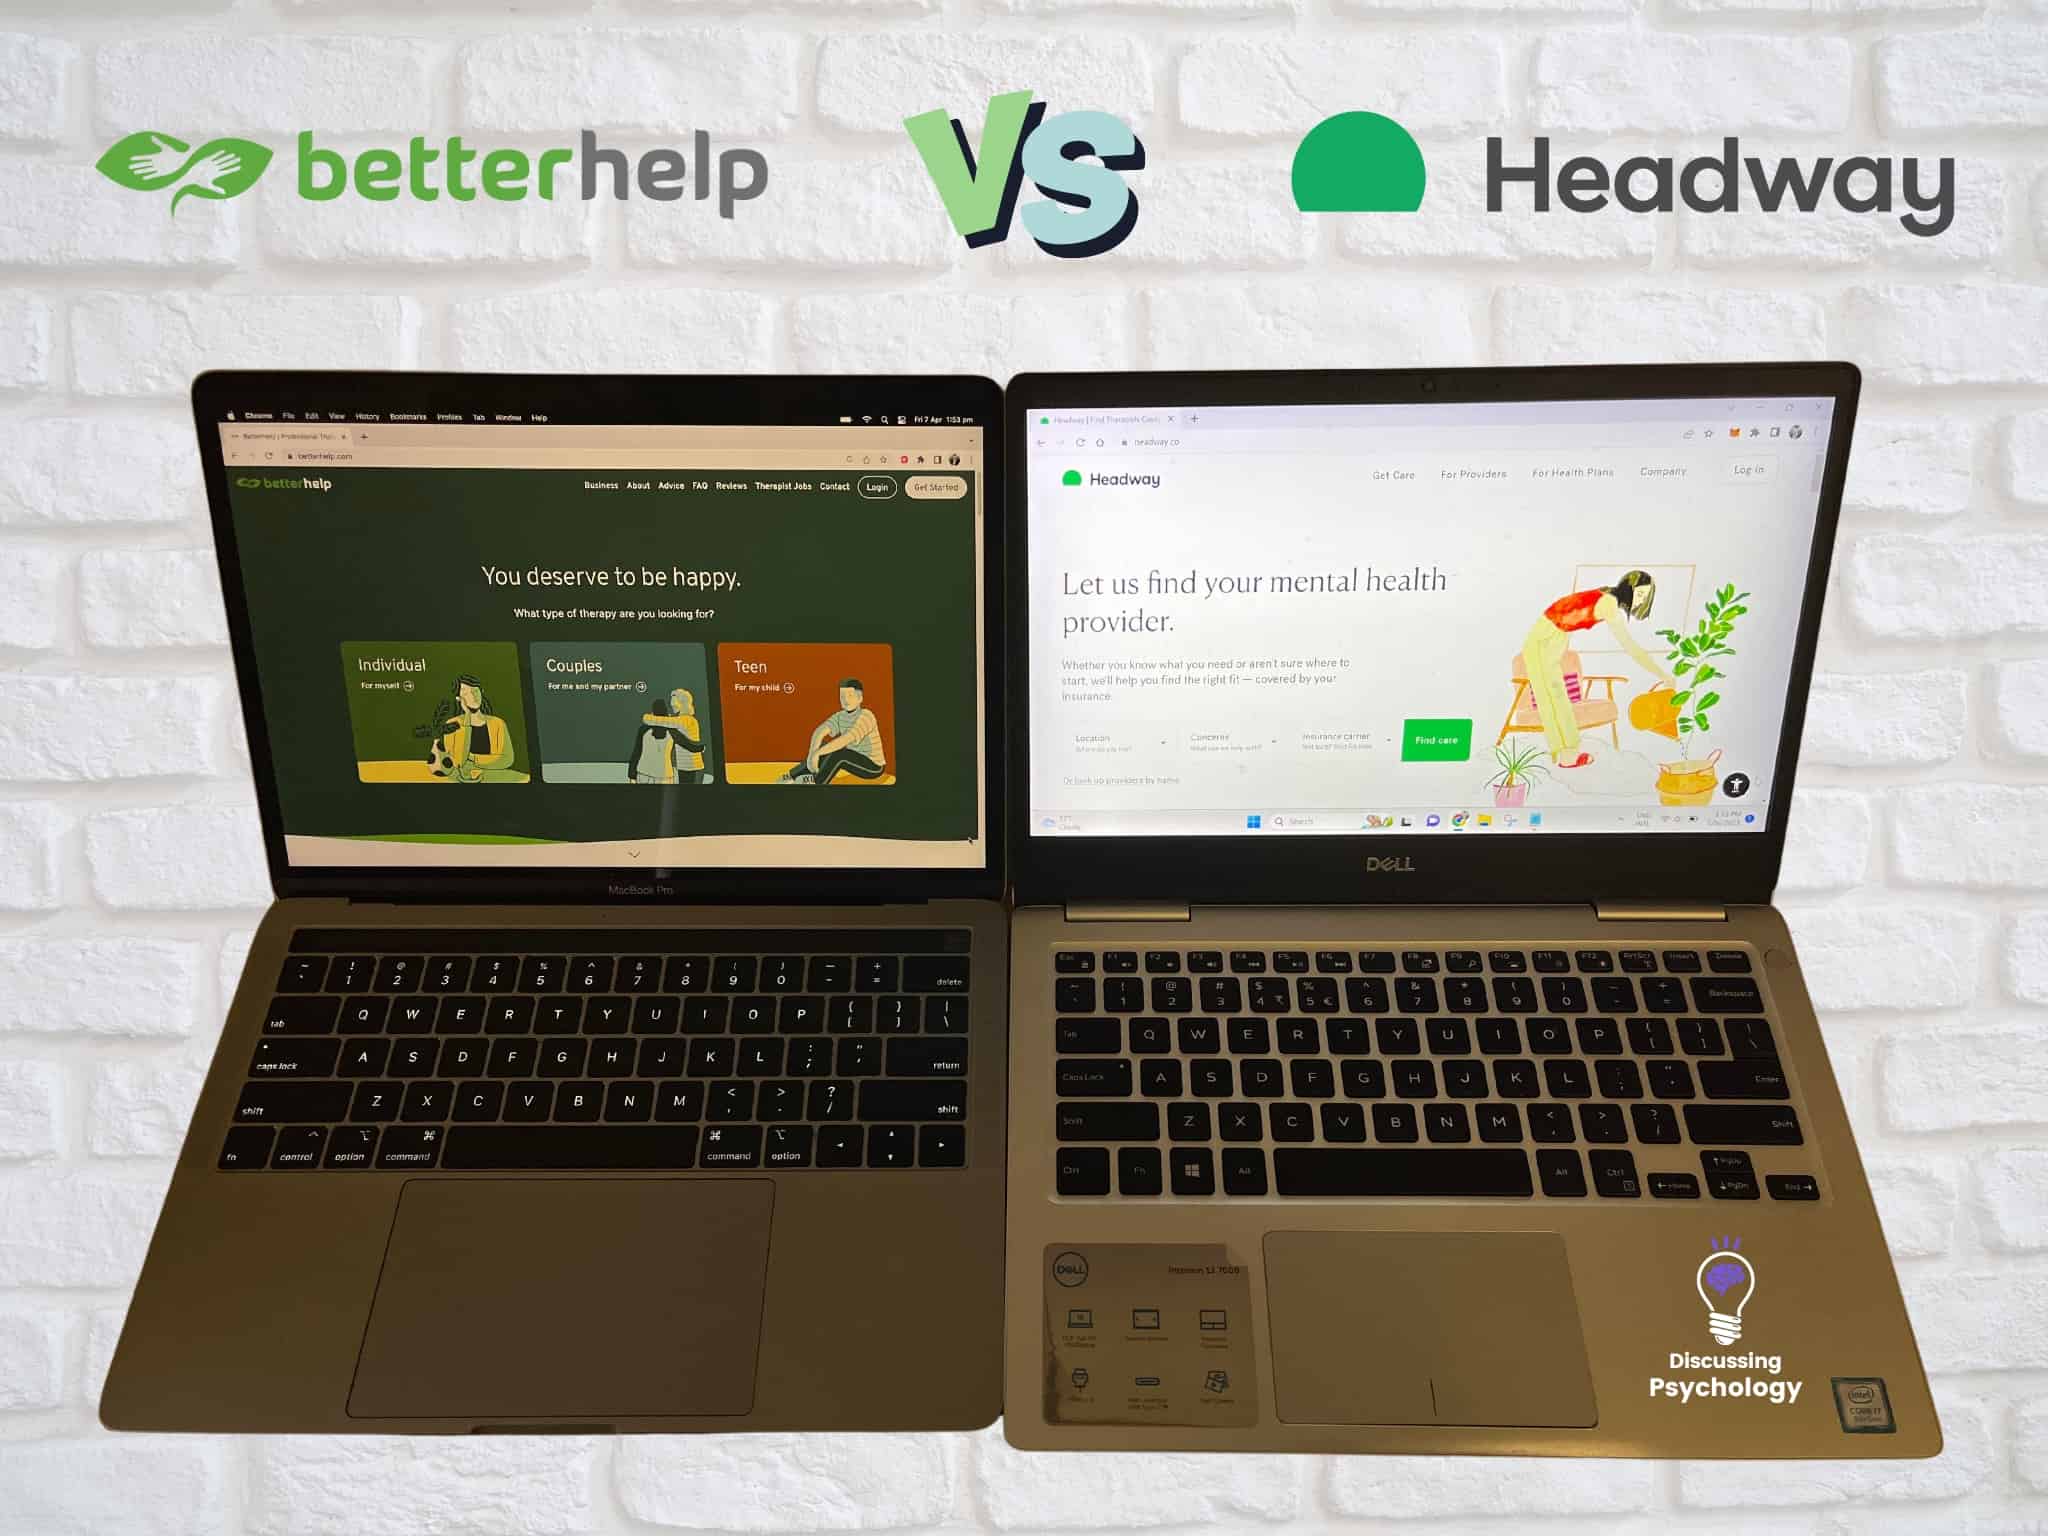 Two laptops, side-by-side showing the homepage of BetterHelp and Headway therapy.